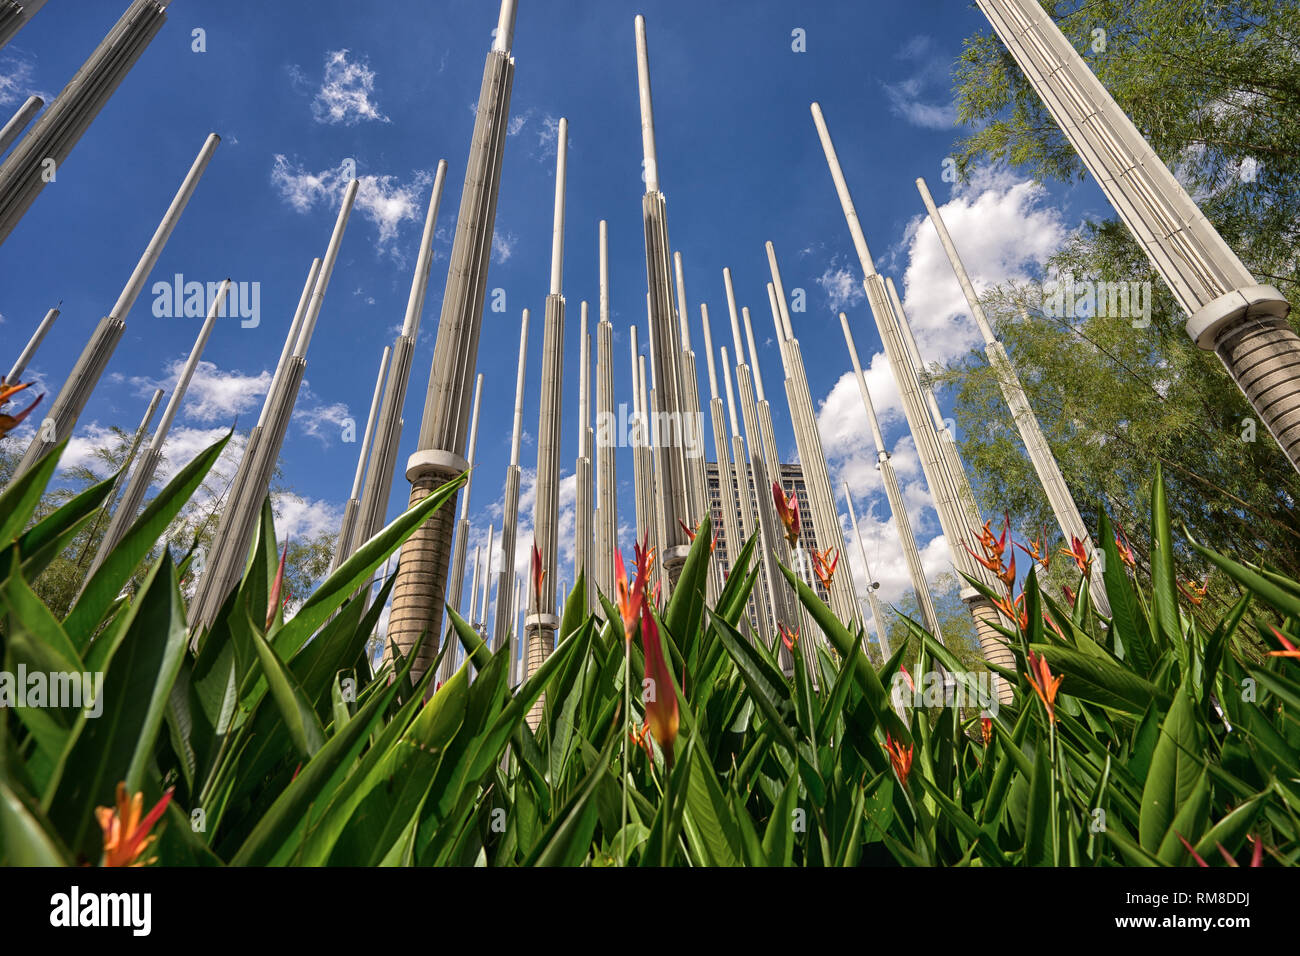 Medellin, Colombia - July 25, 2018: concrete light stands with flowers in the foreground at Plaza Cisneros Stock Photo